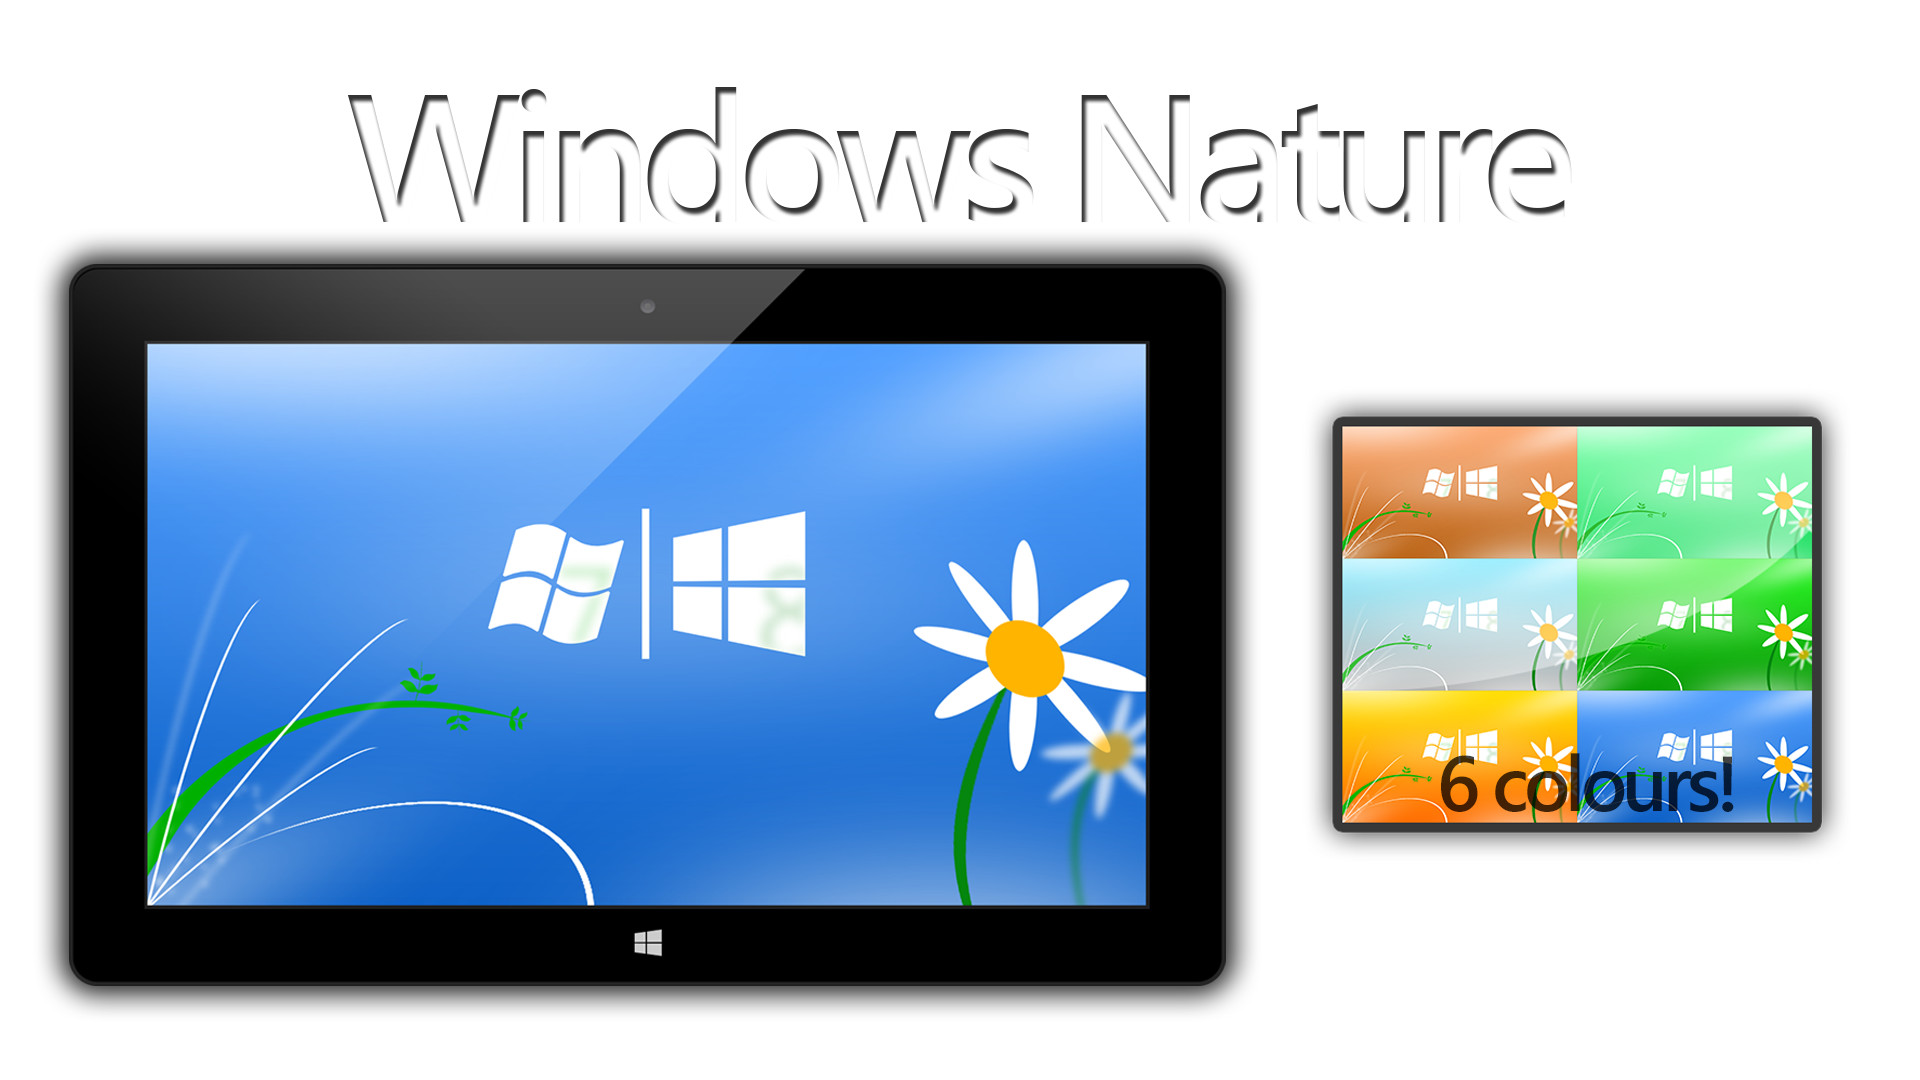 1920x1080 Windows Nature - Wallpaper Pack for Windows 7/8 by MilesAndryPrower on .